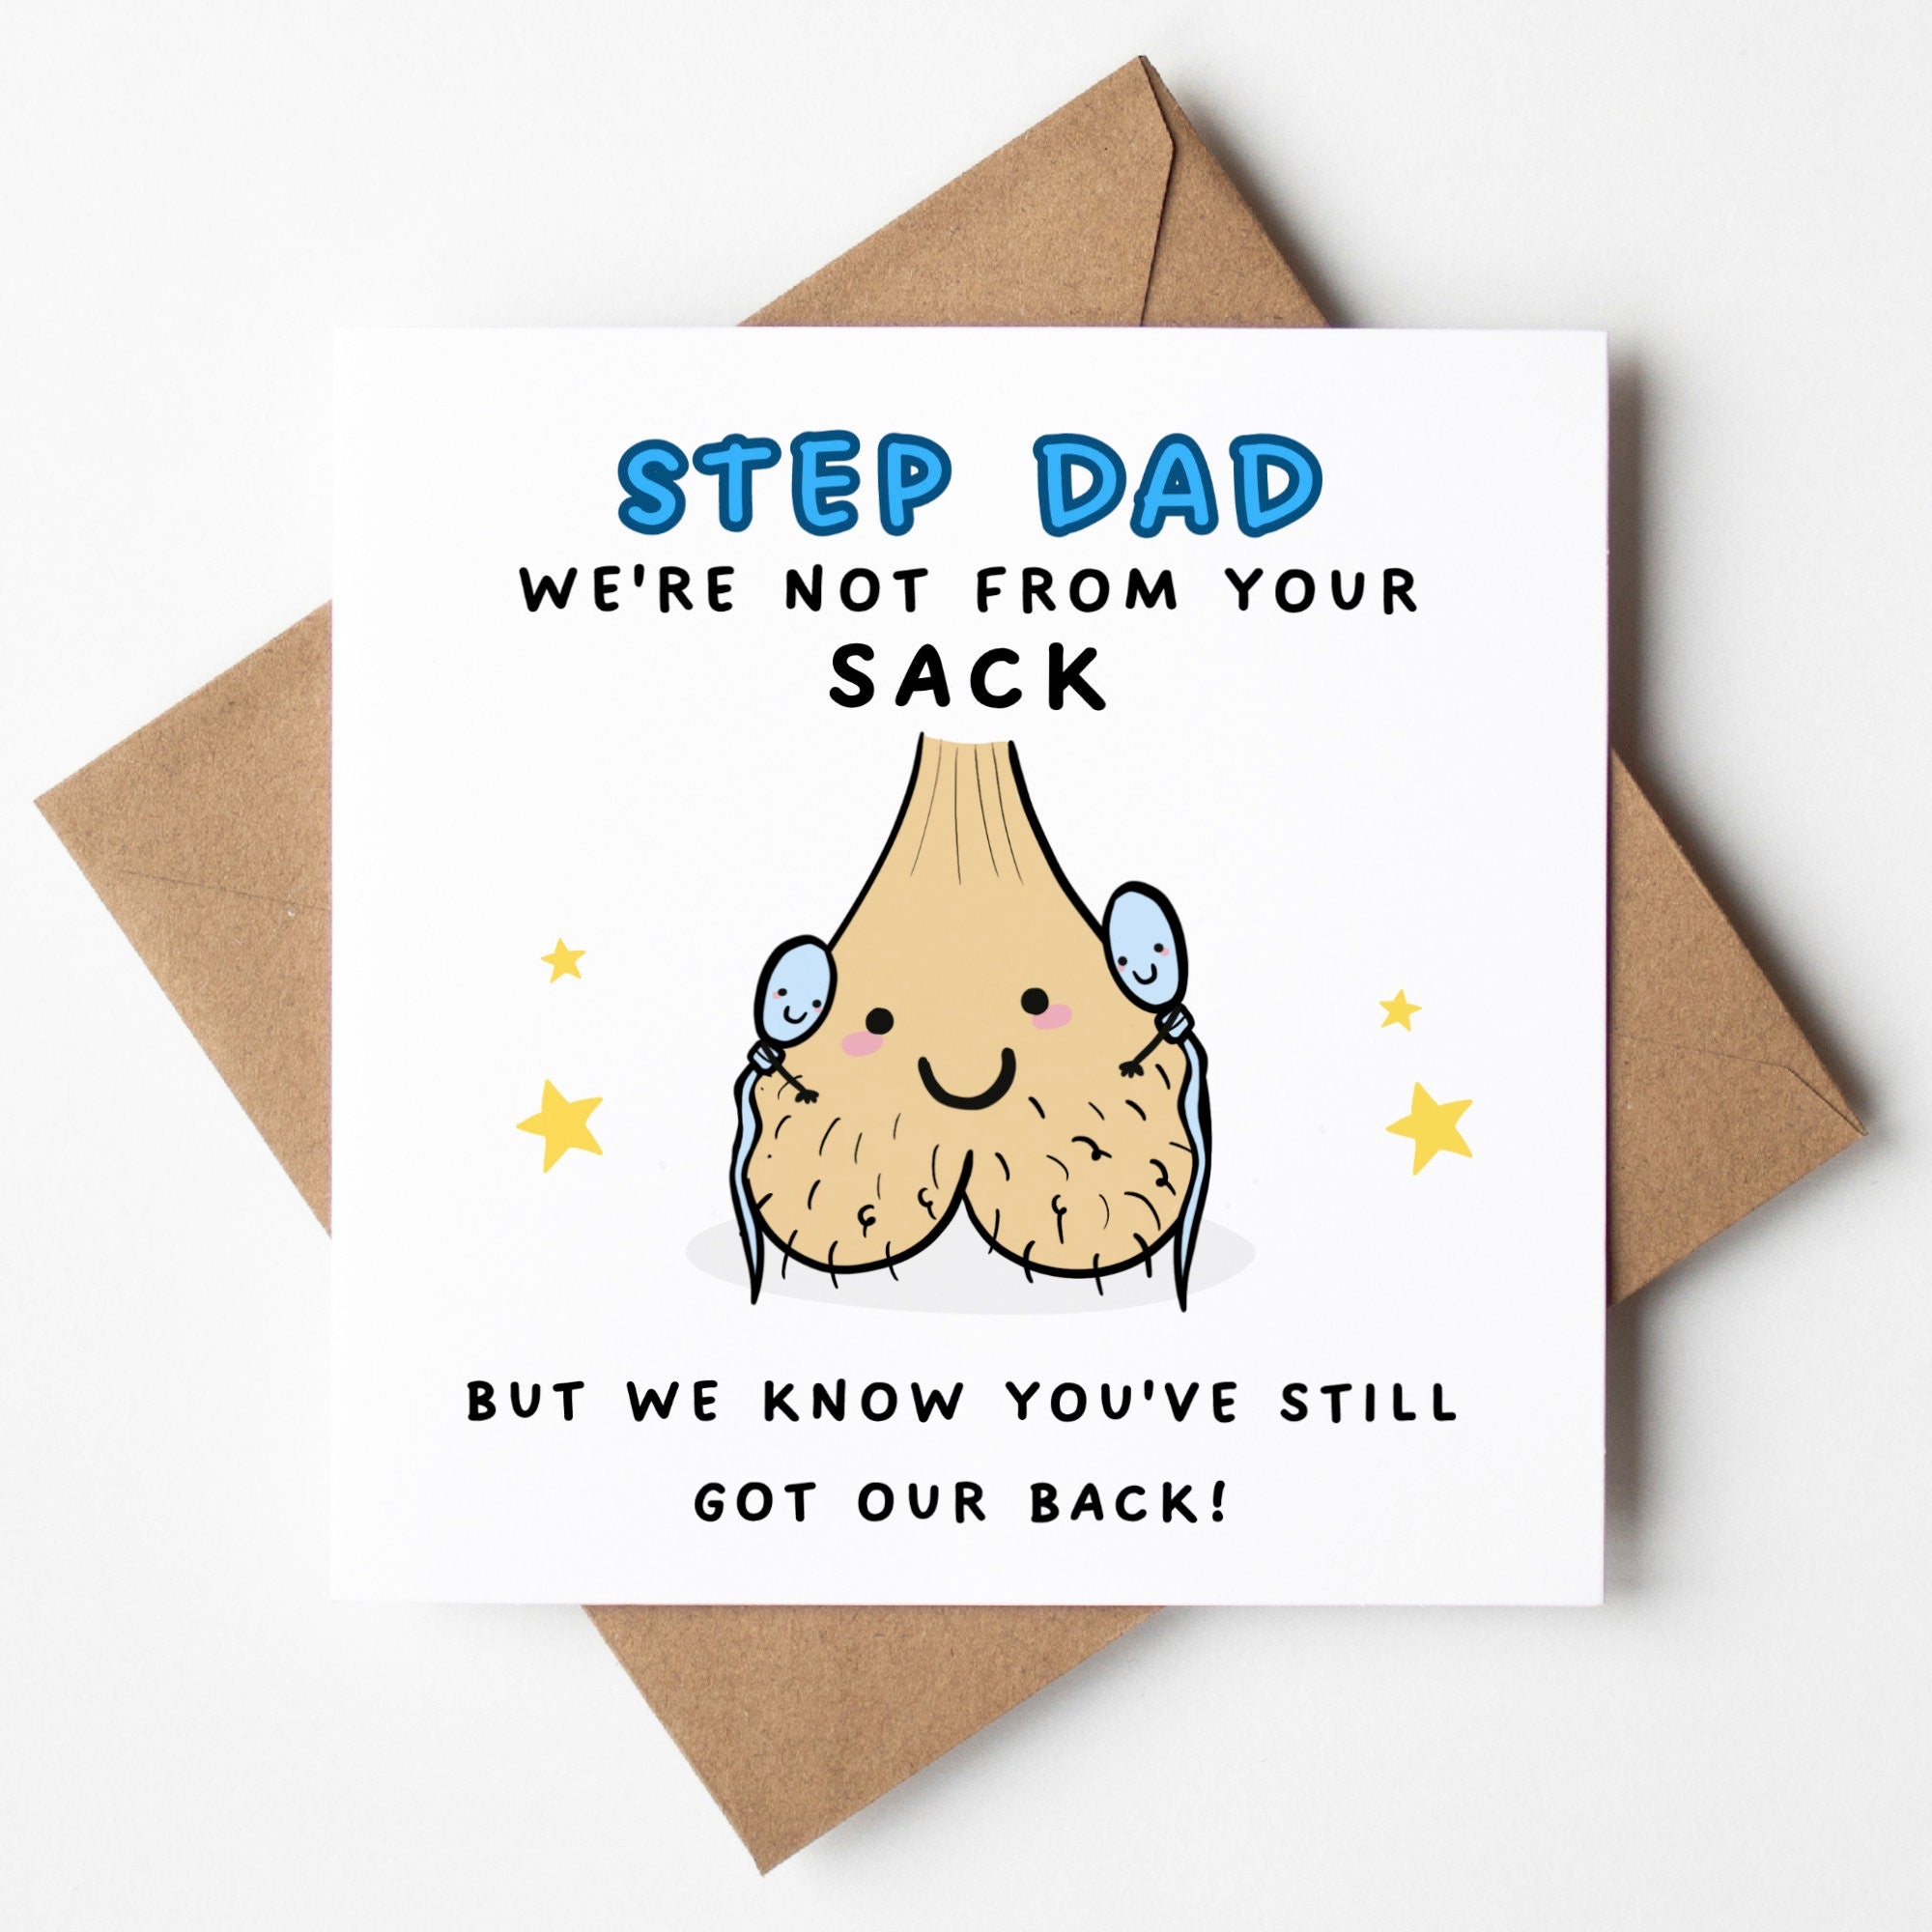 Step Dad Fathers Day Card, Not From Your Sack, Gifts For Step Dads, Funny Fathers Day Card, Cute Dad Cards, Fathers Day, Stepped Up Dad